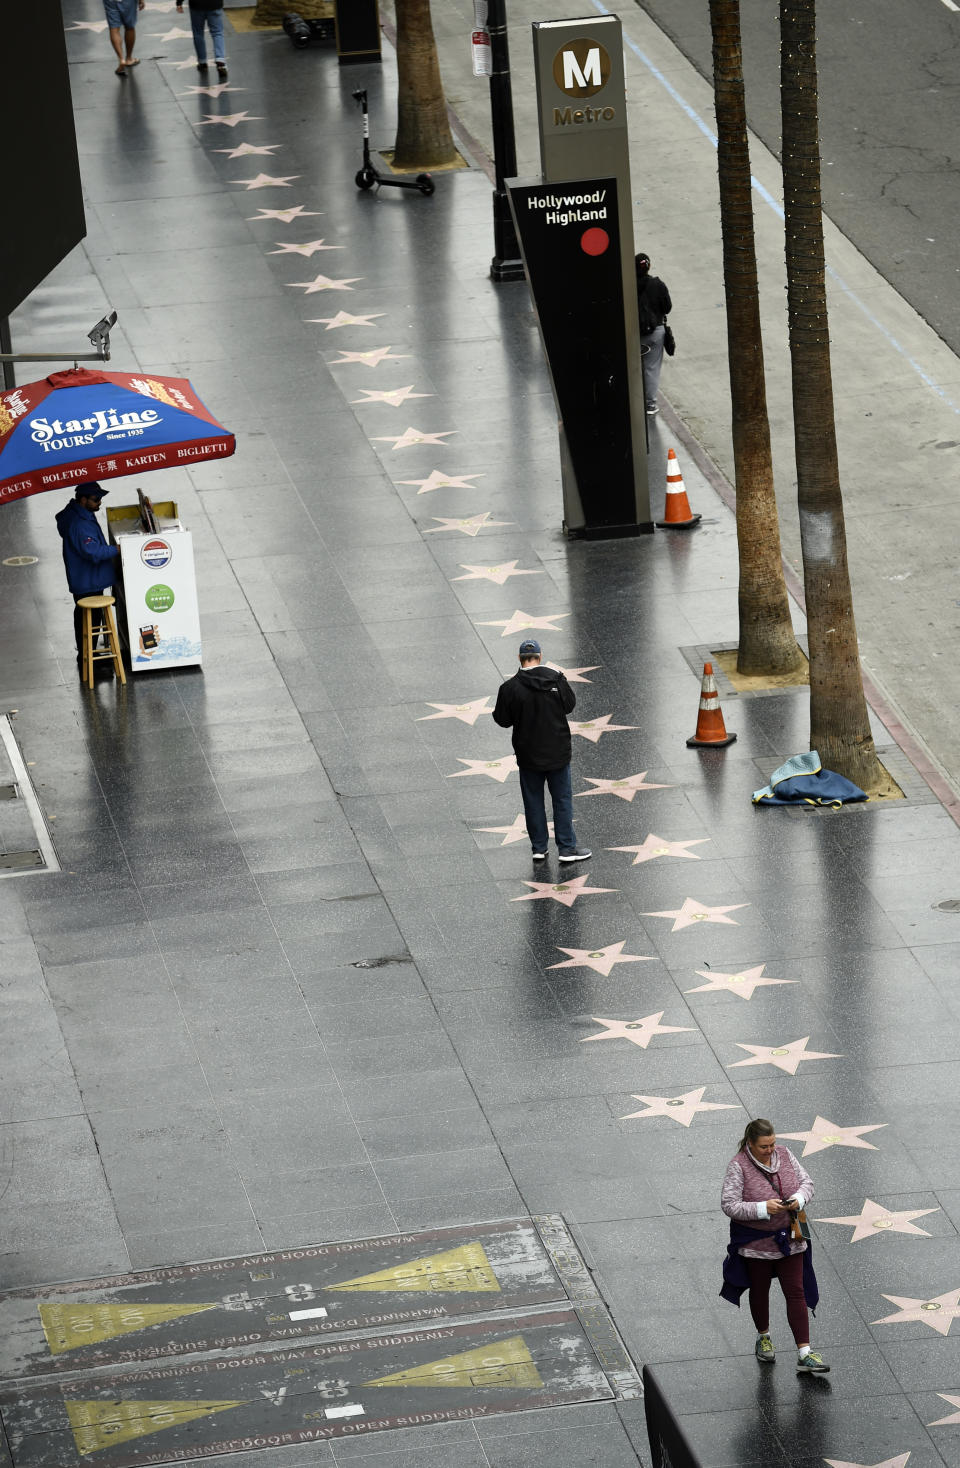 Pedestrians walk down a sparsely populated Hollywood Boulevard, Thursday, March 12, 2020, in the Hollywood section of Los Angeles. California Governor Gavin Newsom recommended the cancellation or postponement of gatherings of 250 or more people through at least the end of the month due to the coronavirus outbreak. For most people, the new coronavirus causes only mild or moderate symptoms. For some it can cause more severe illness. (AP Photo/Chris Pizzello)